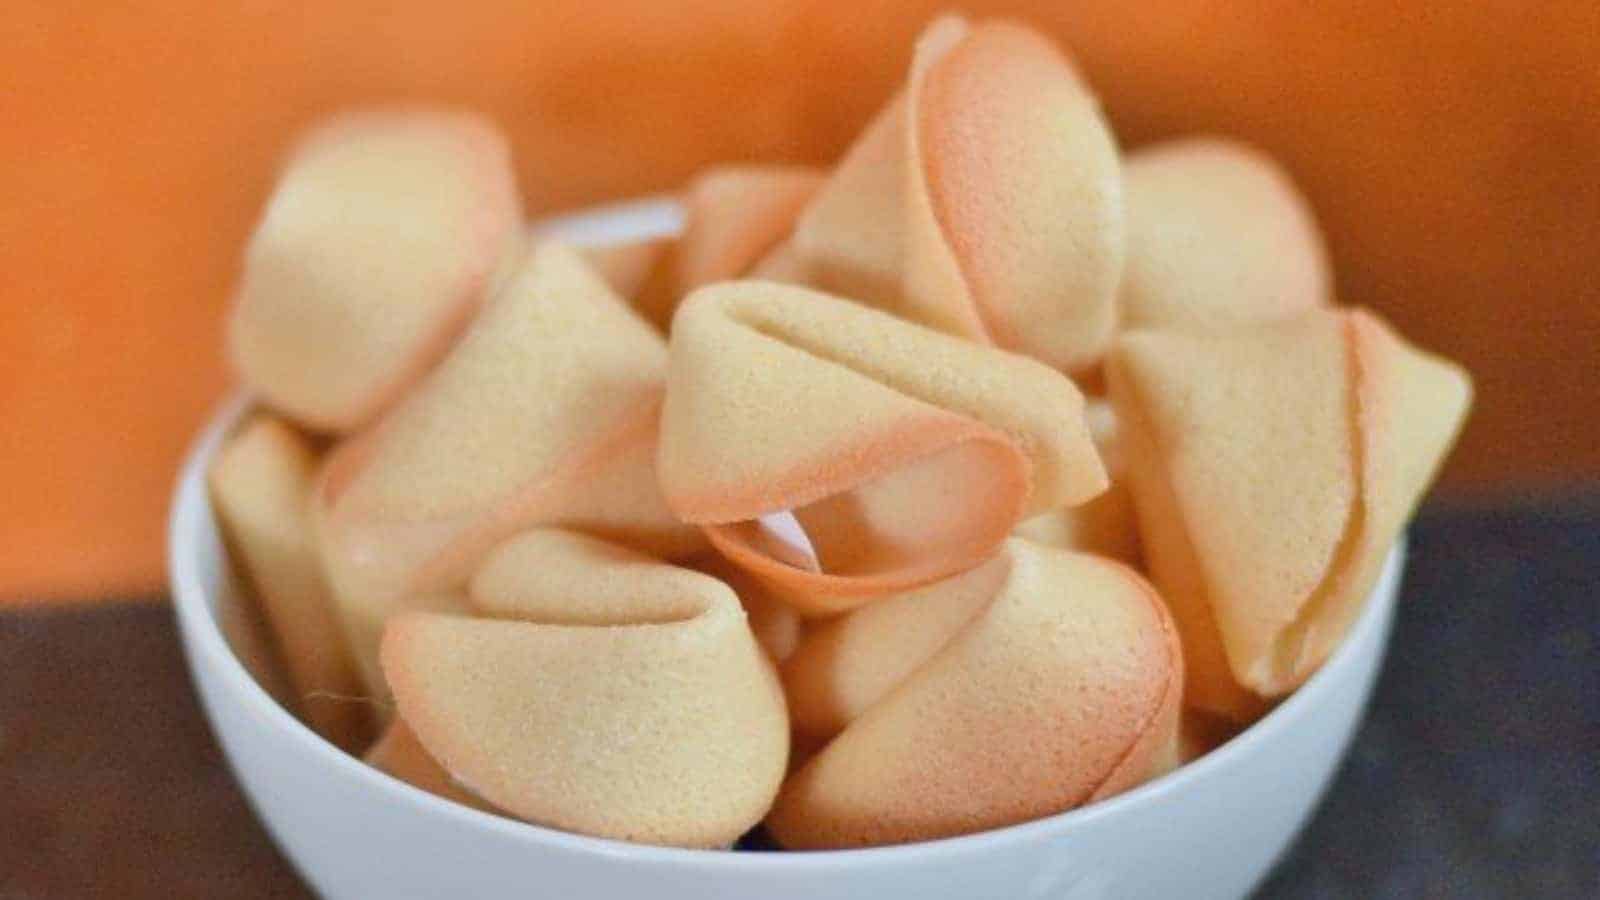 Image shows a Bowl filled with homemade fortune cookies.